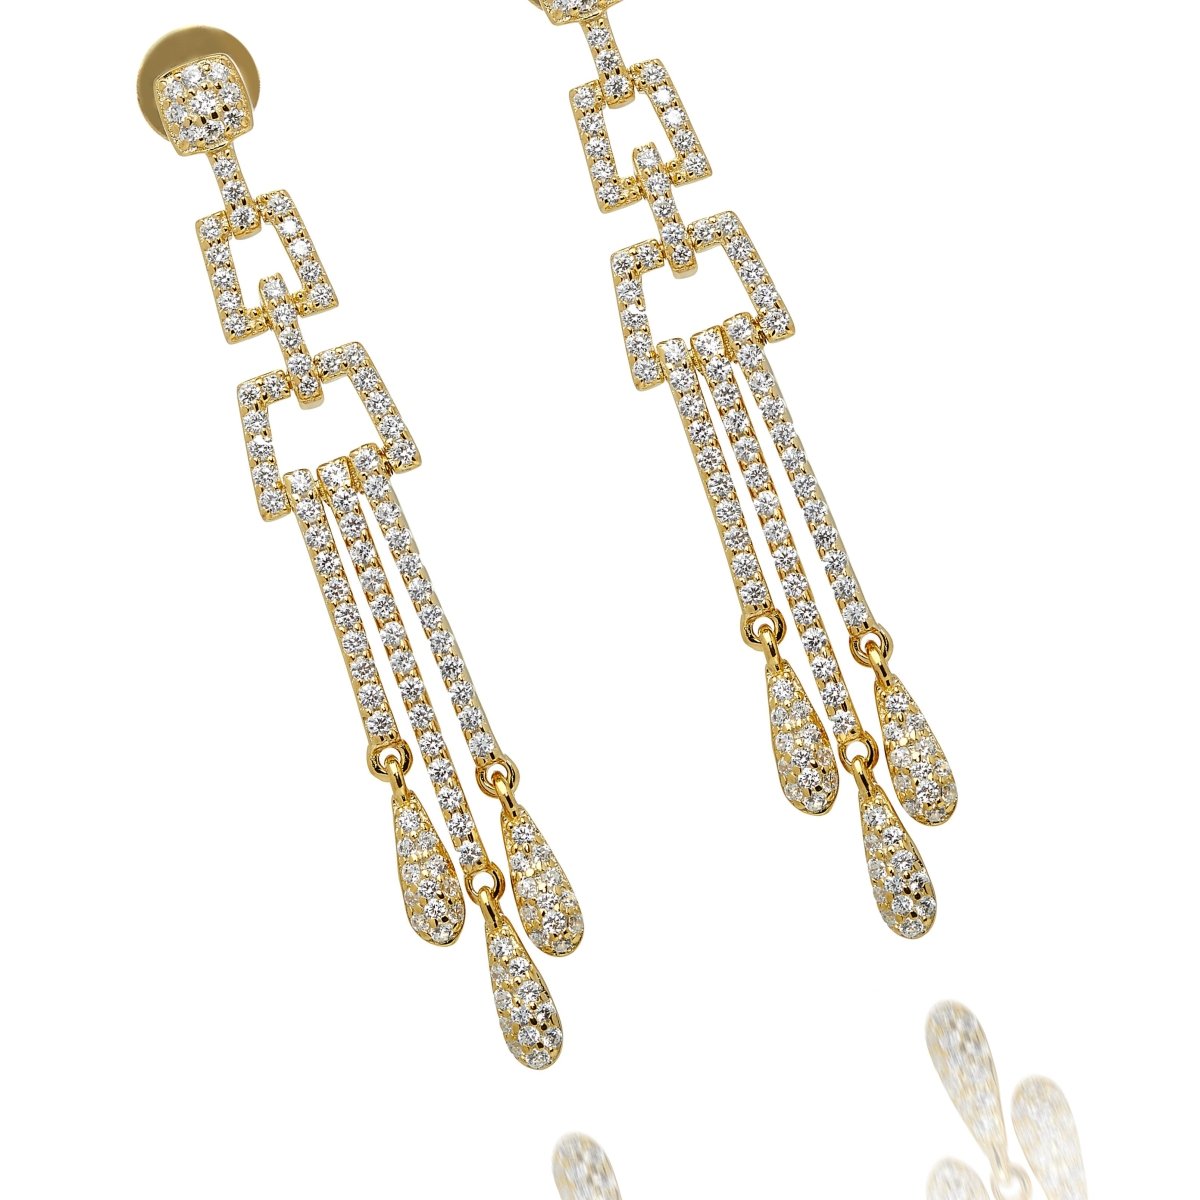 2.70ct Cubic Zirconia Art Deco Drop Earrings in 14k Yellow Gold Plated Silver